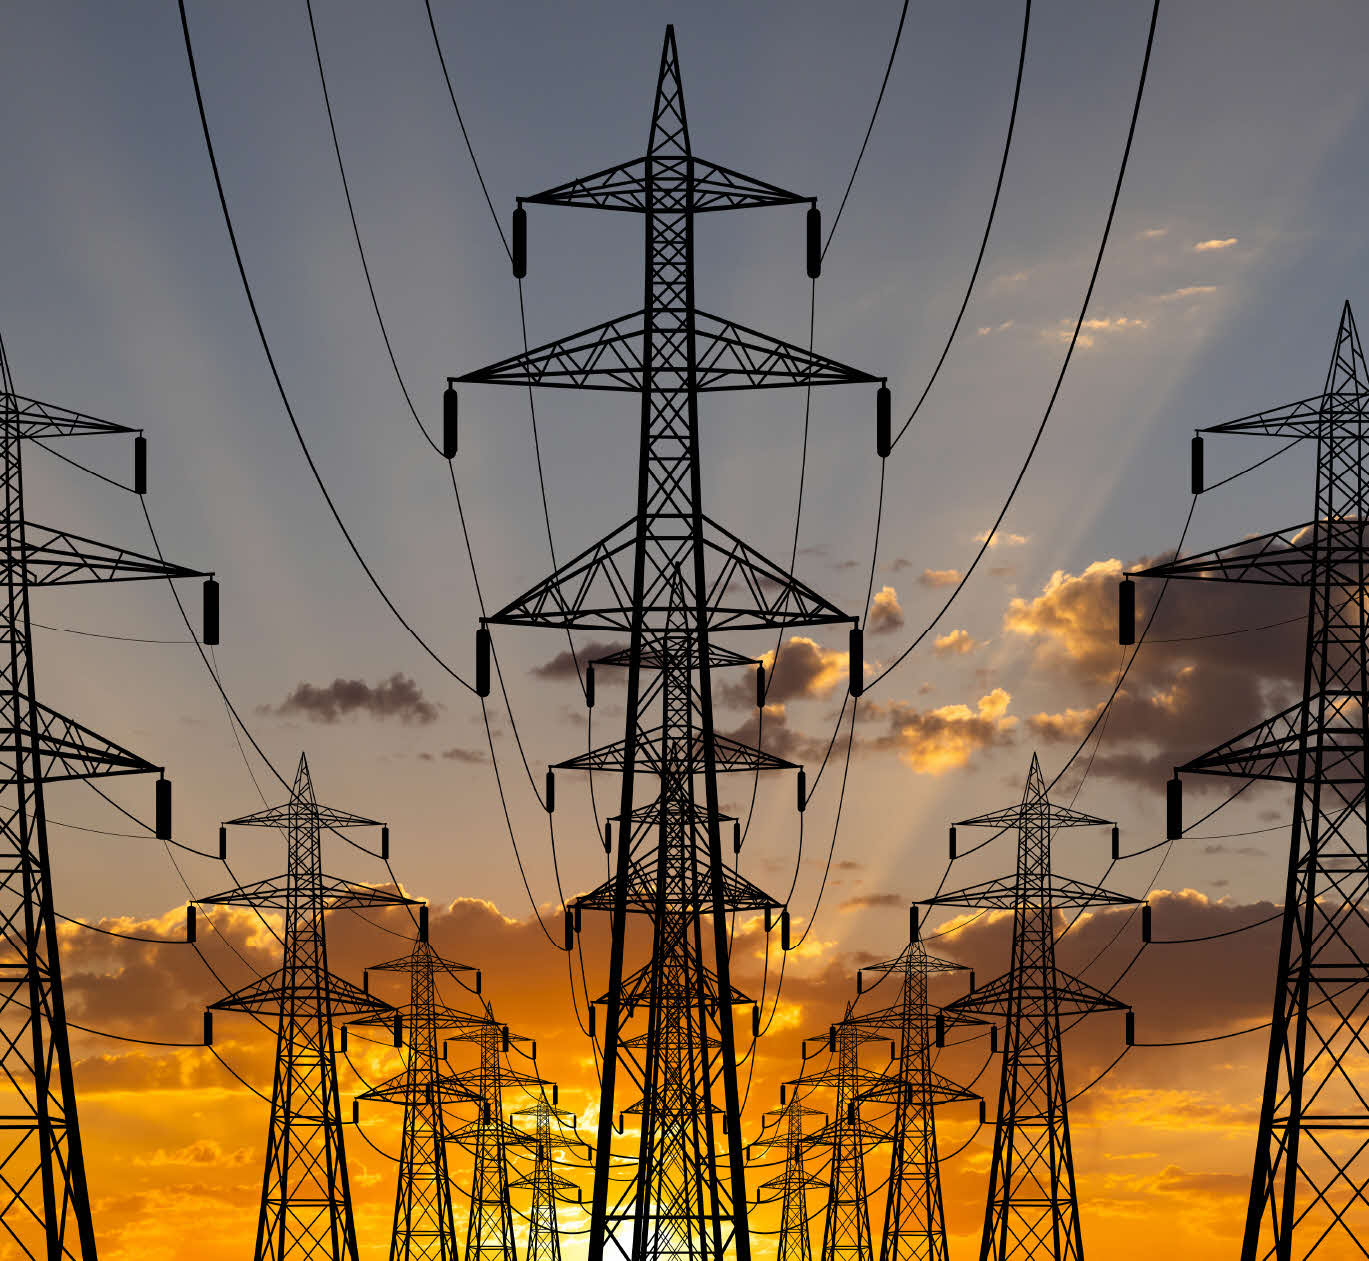 The path to enabling energy transmission sector growth